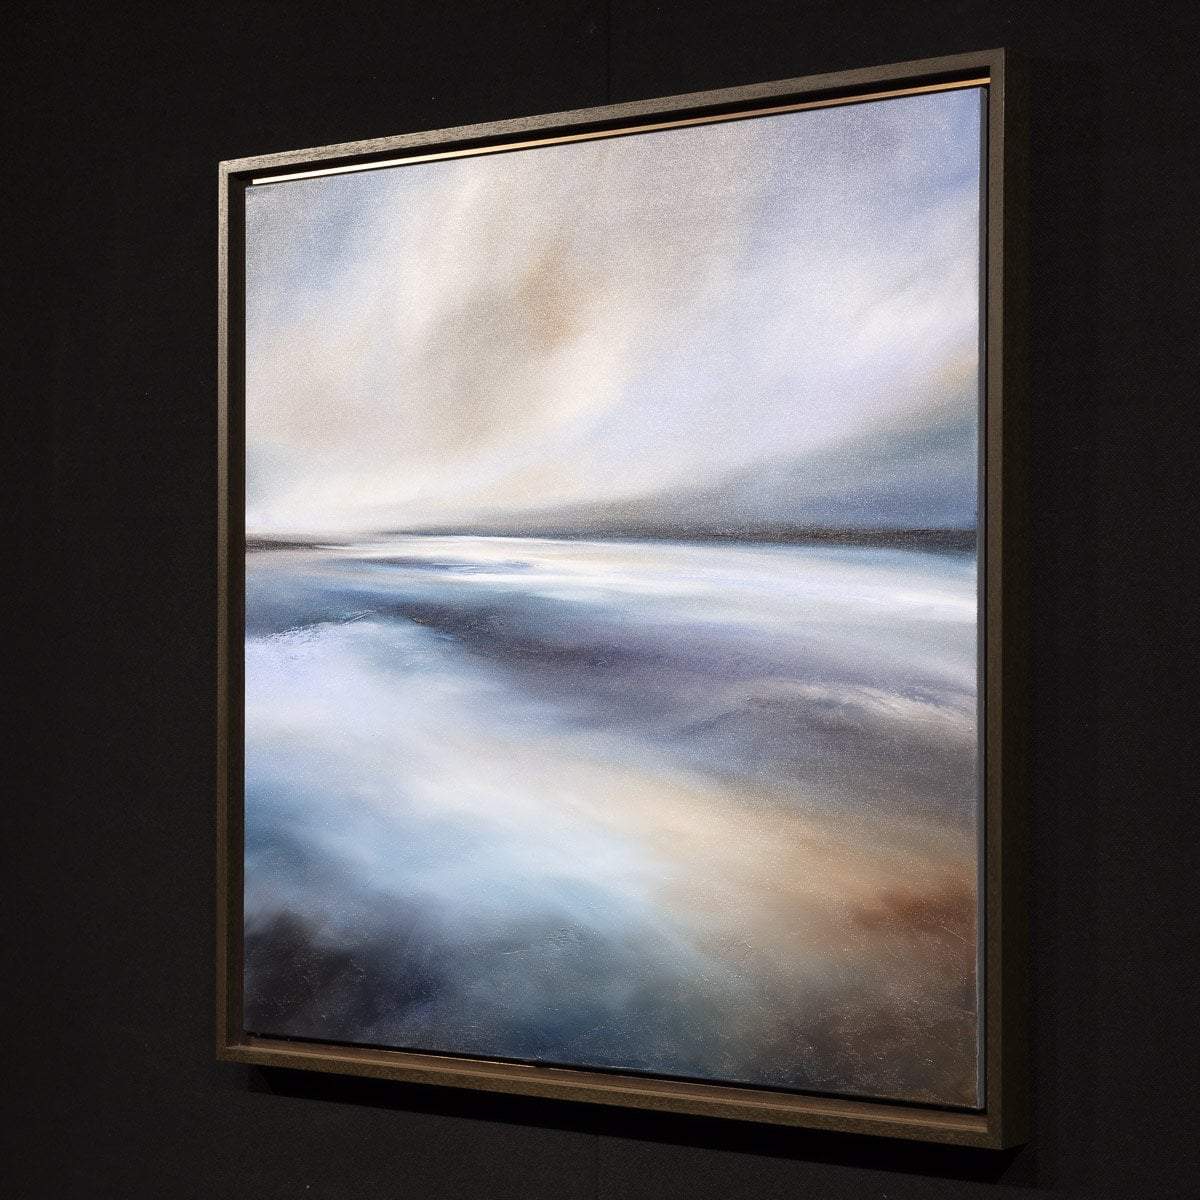 Where The Sea Meets The Sky - Original Michael Claxton Framed